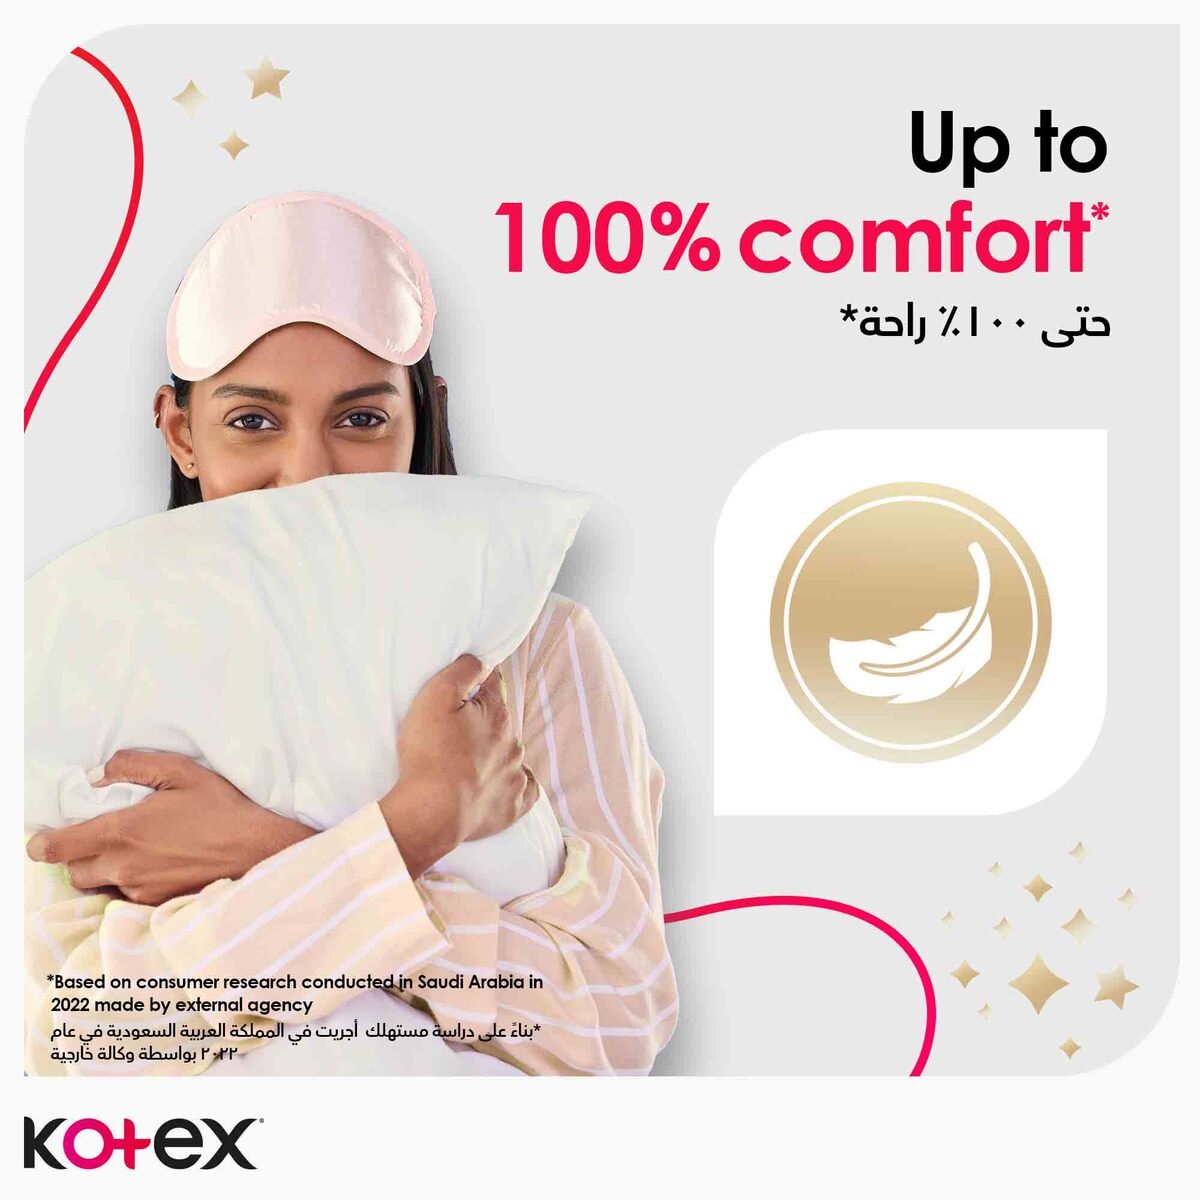 Kotex Maxi Protect Thick Overnight Protection Sanitary Pads with Wings 24 pcs